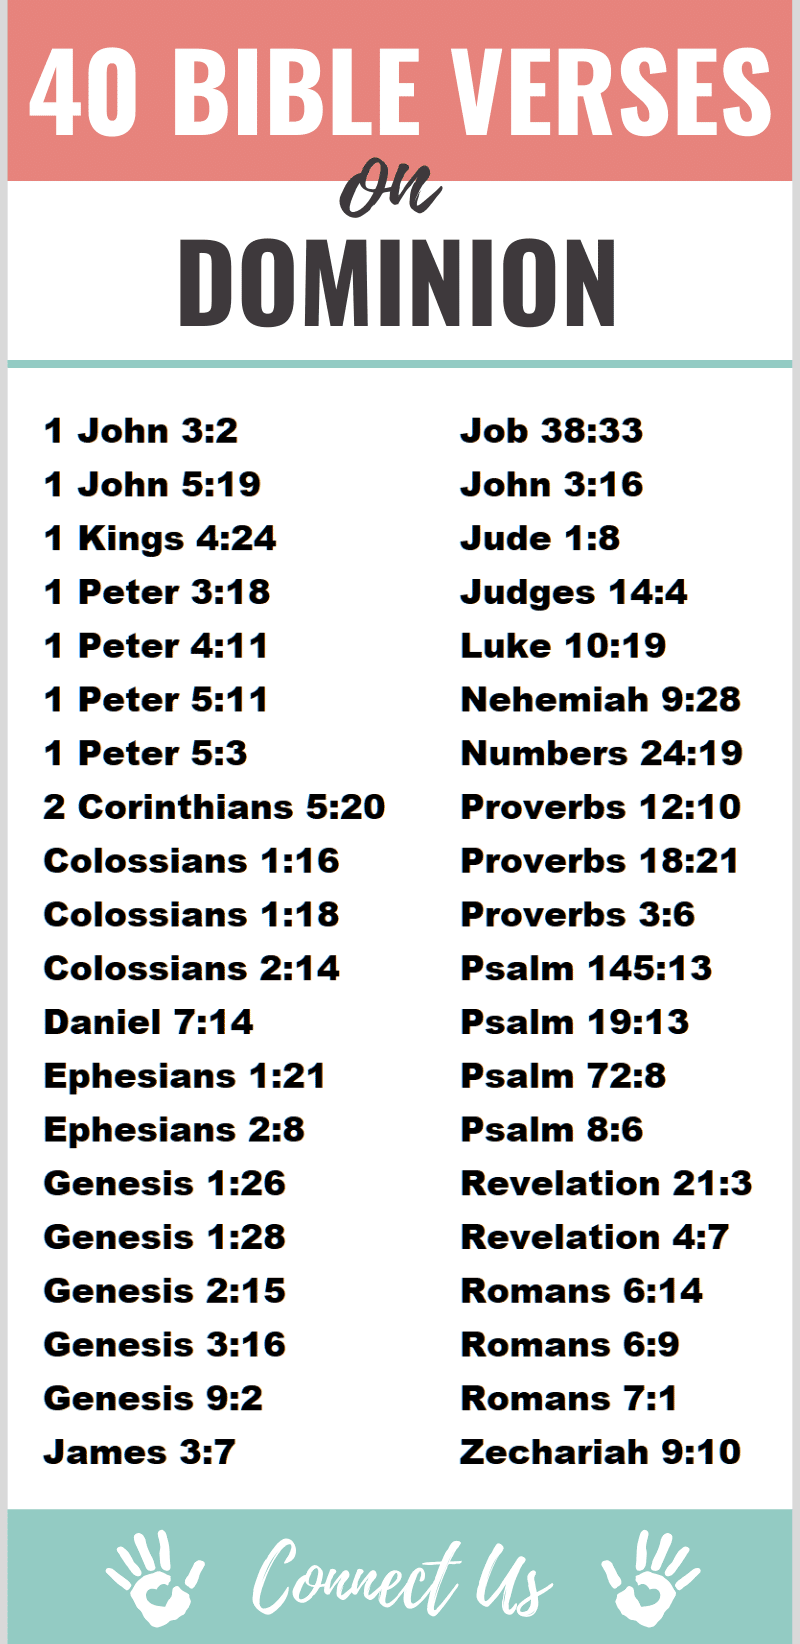 Bible Verses on Dominion and Authority